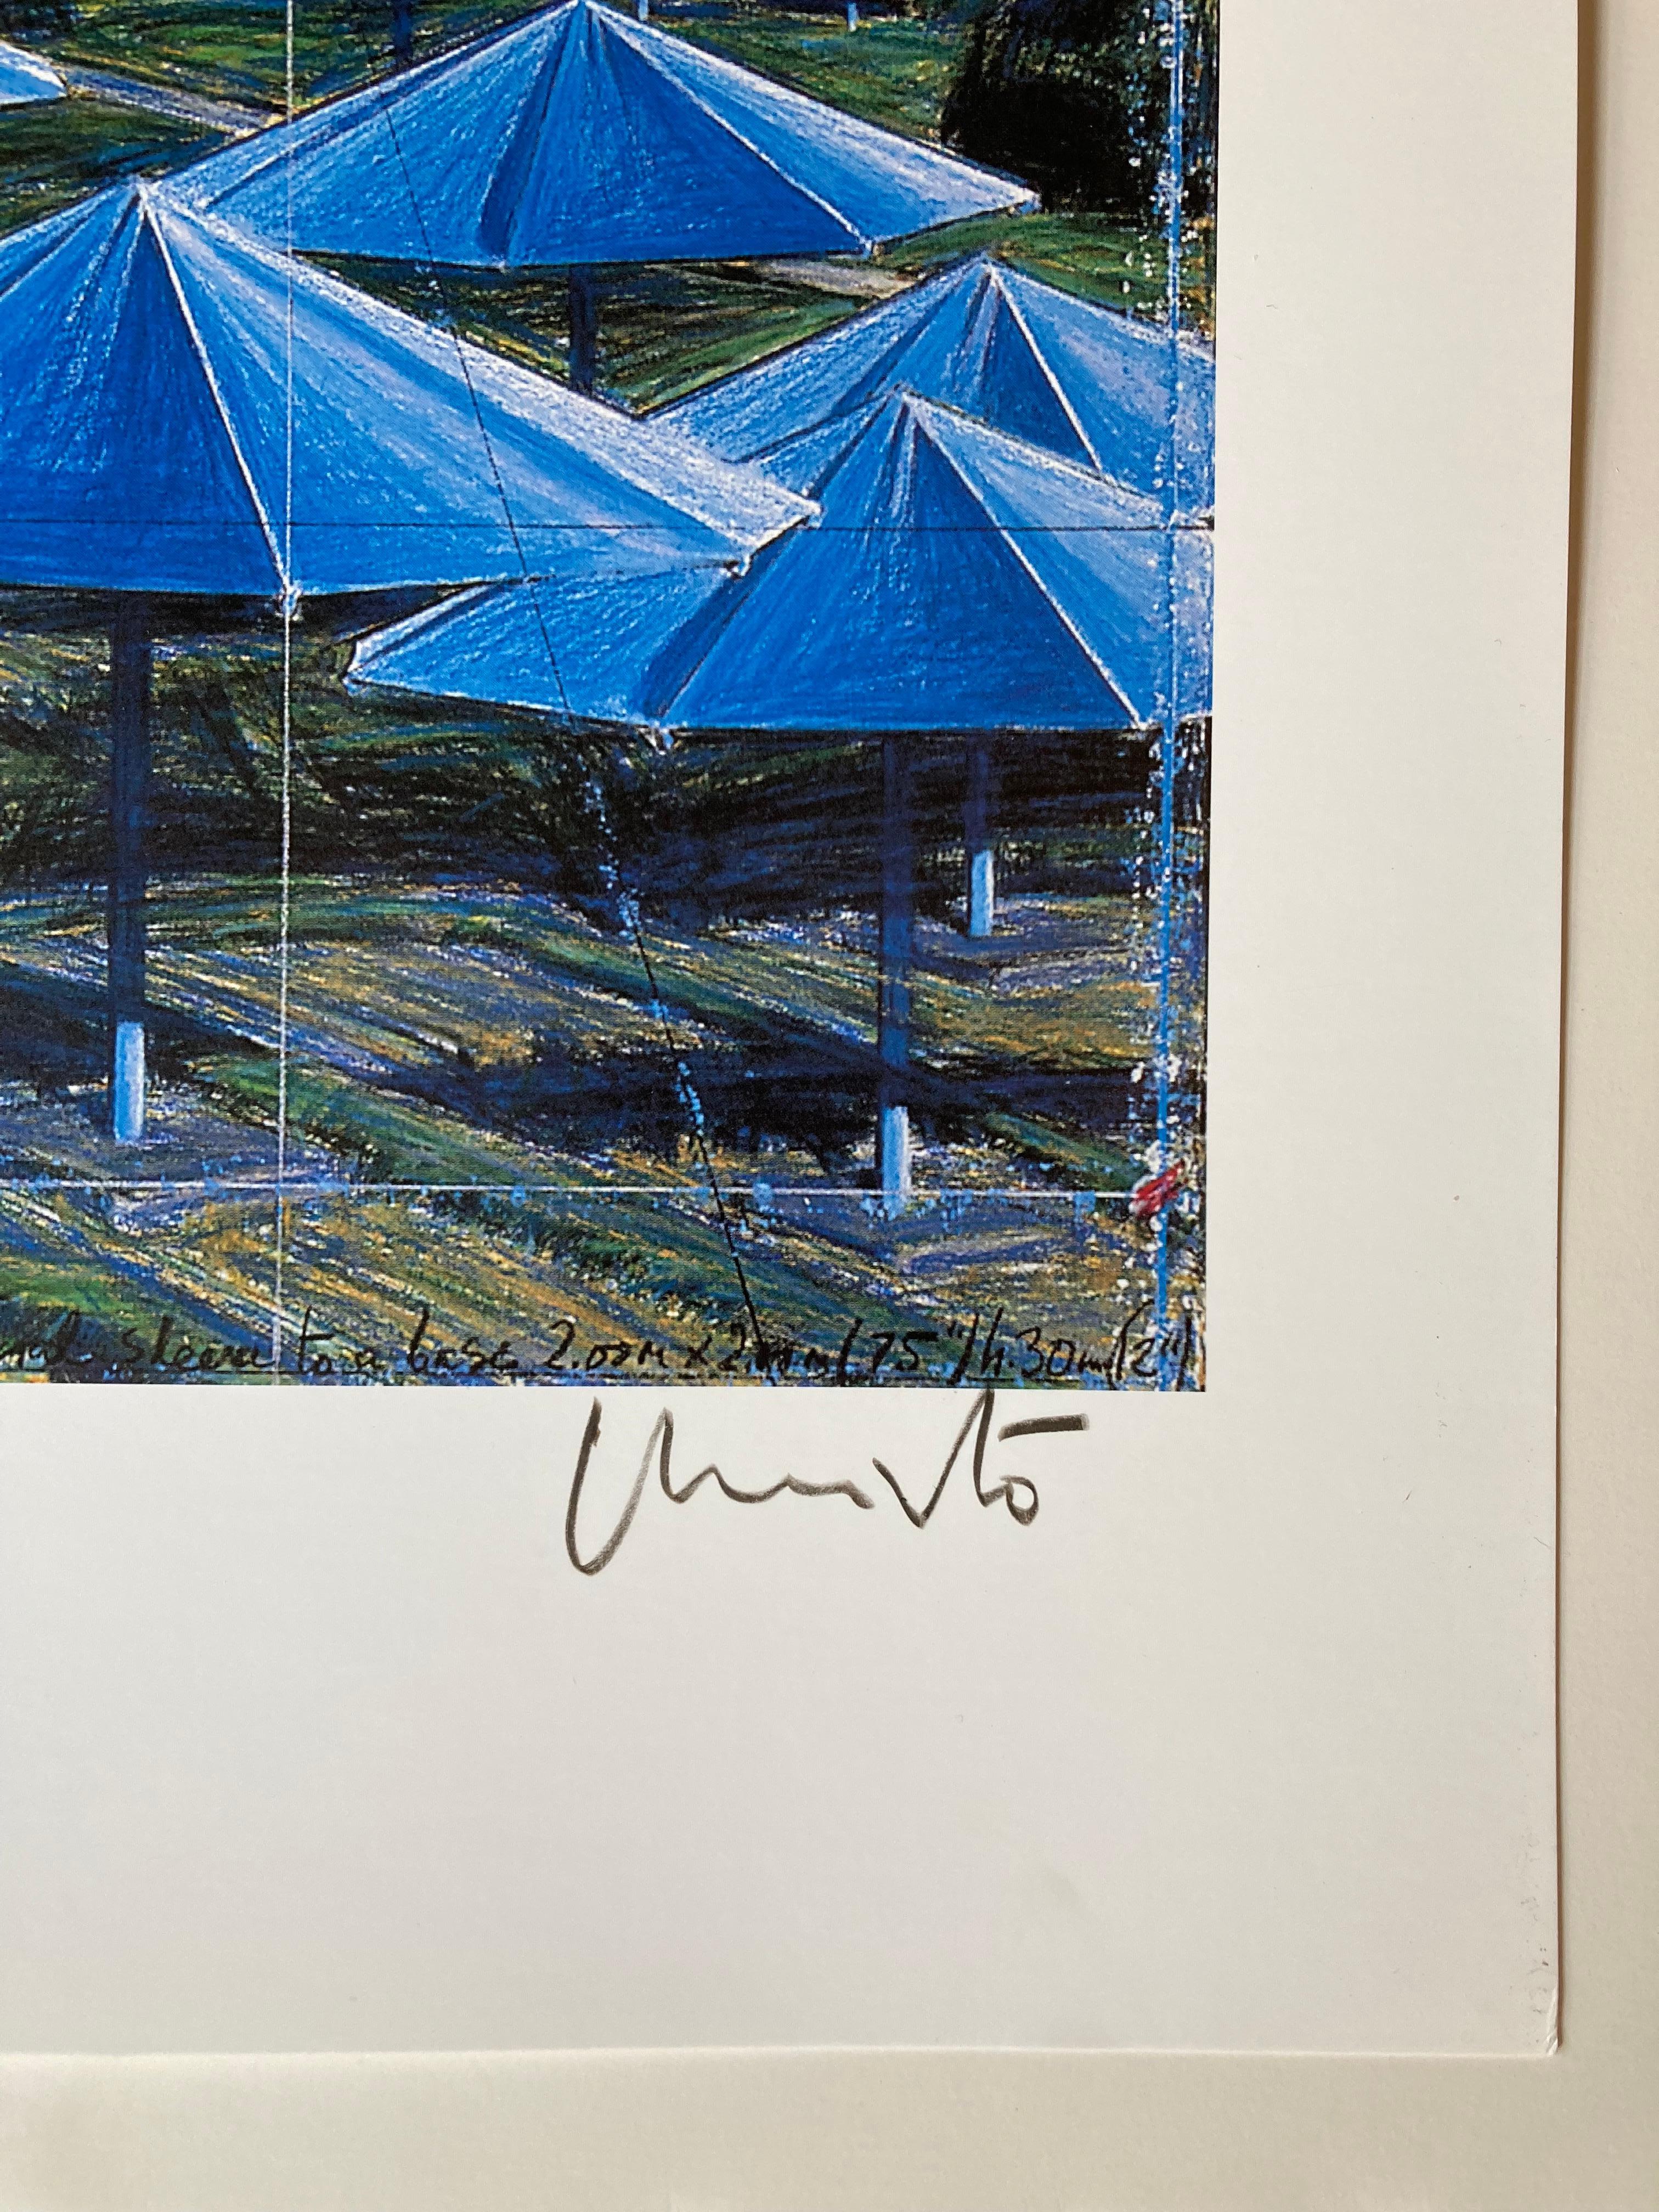 Christo (Bulgarian, 1935-2020)
The Umbrellas (Joint Project for Japan and USA), 1991 (Blue)
Offset lithograph on wove paper, 
Signed in crayon lower right
Printed by Schumacher Edition Fils, Dusseldorf, Germany
Sheet (unframed): 19.75